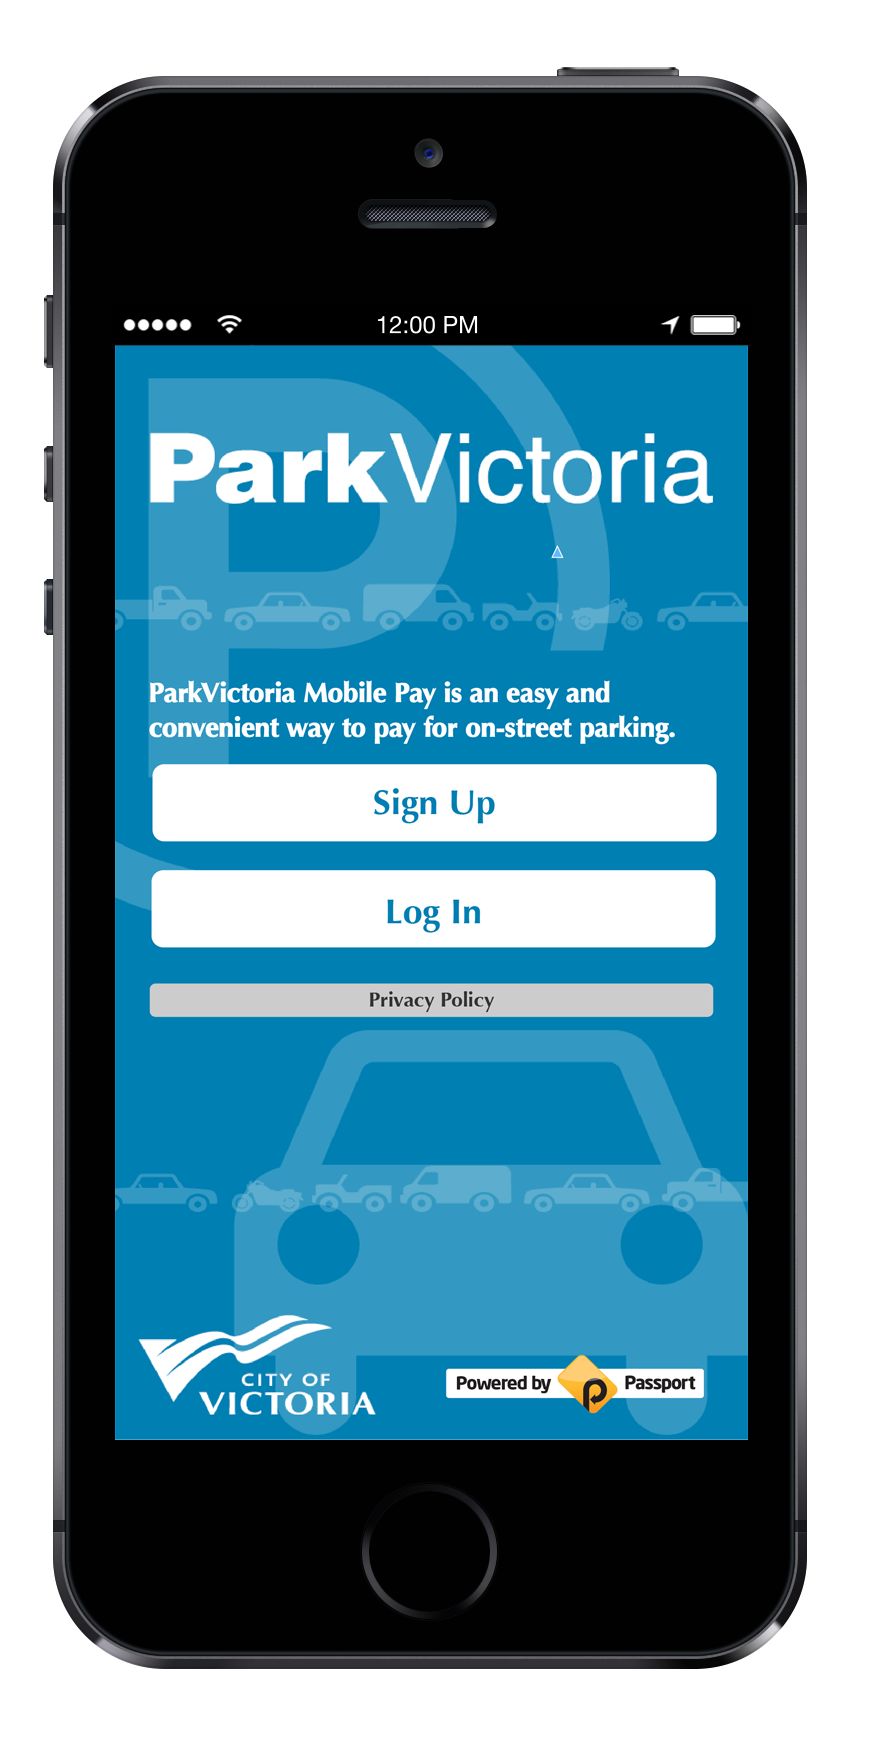 ParkVictoria Sign Up screen